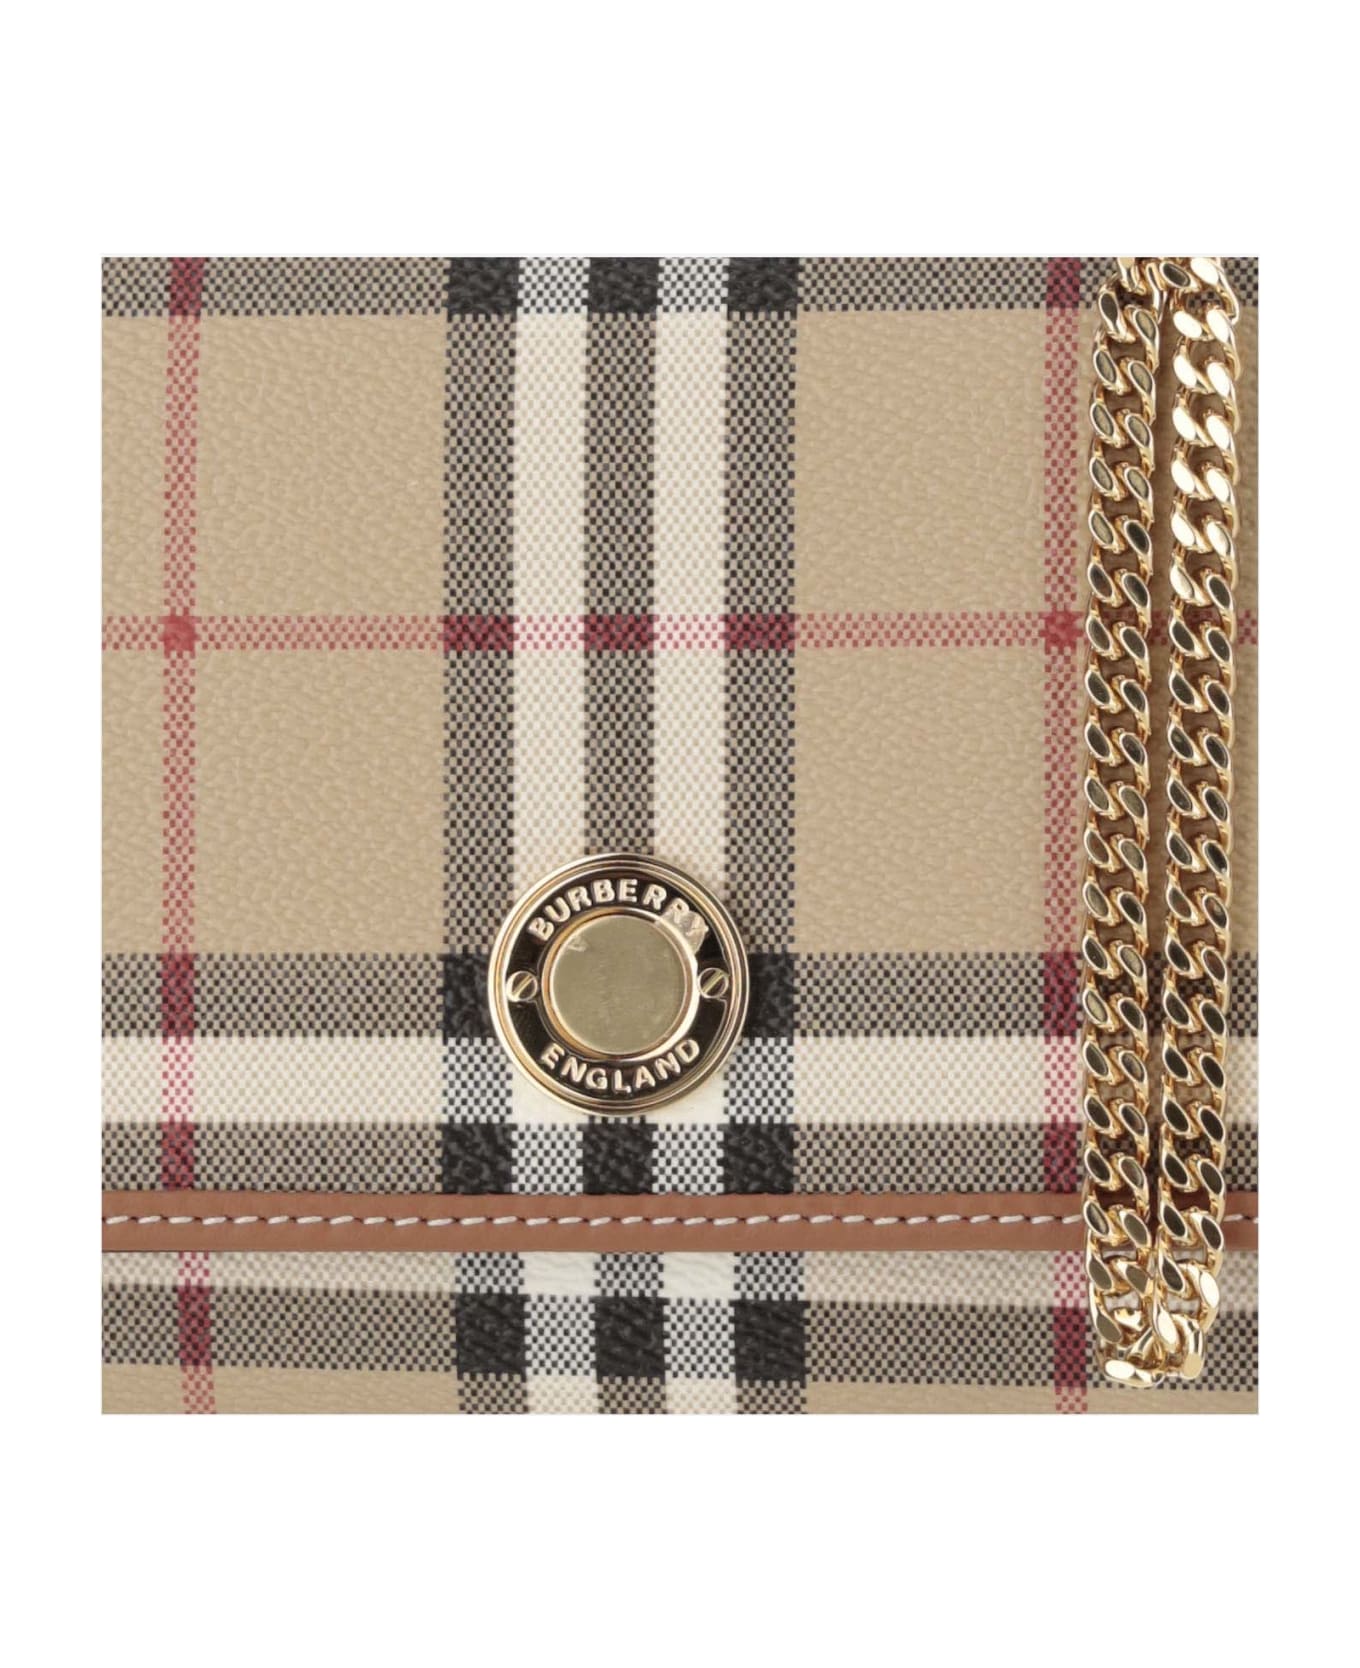 Burberry Check Wallet With Chain Strap - Red クラッチバッグ